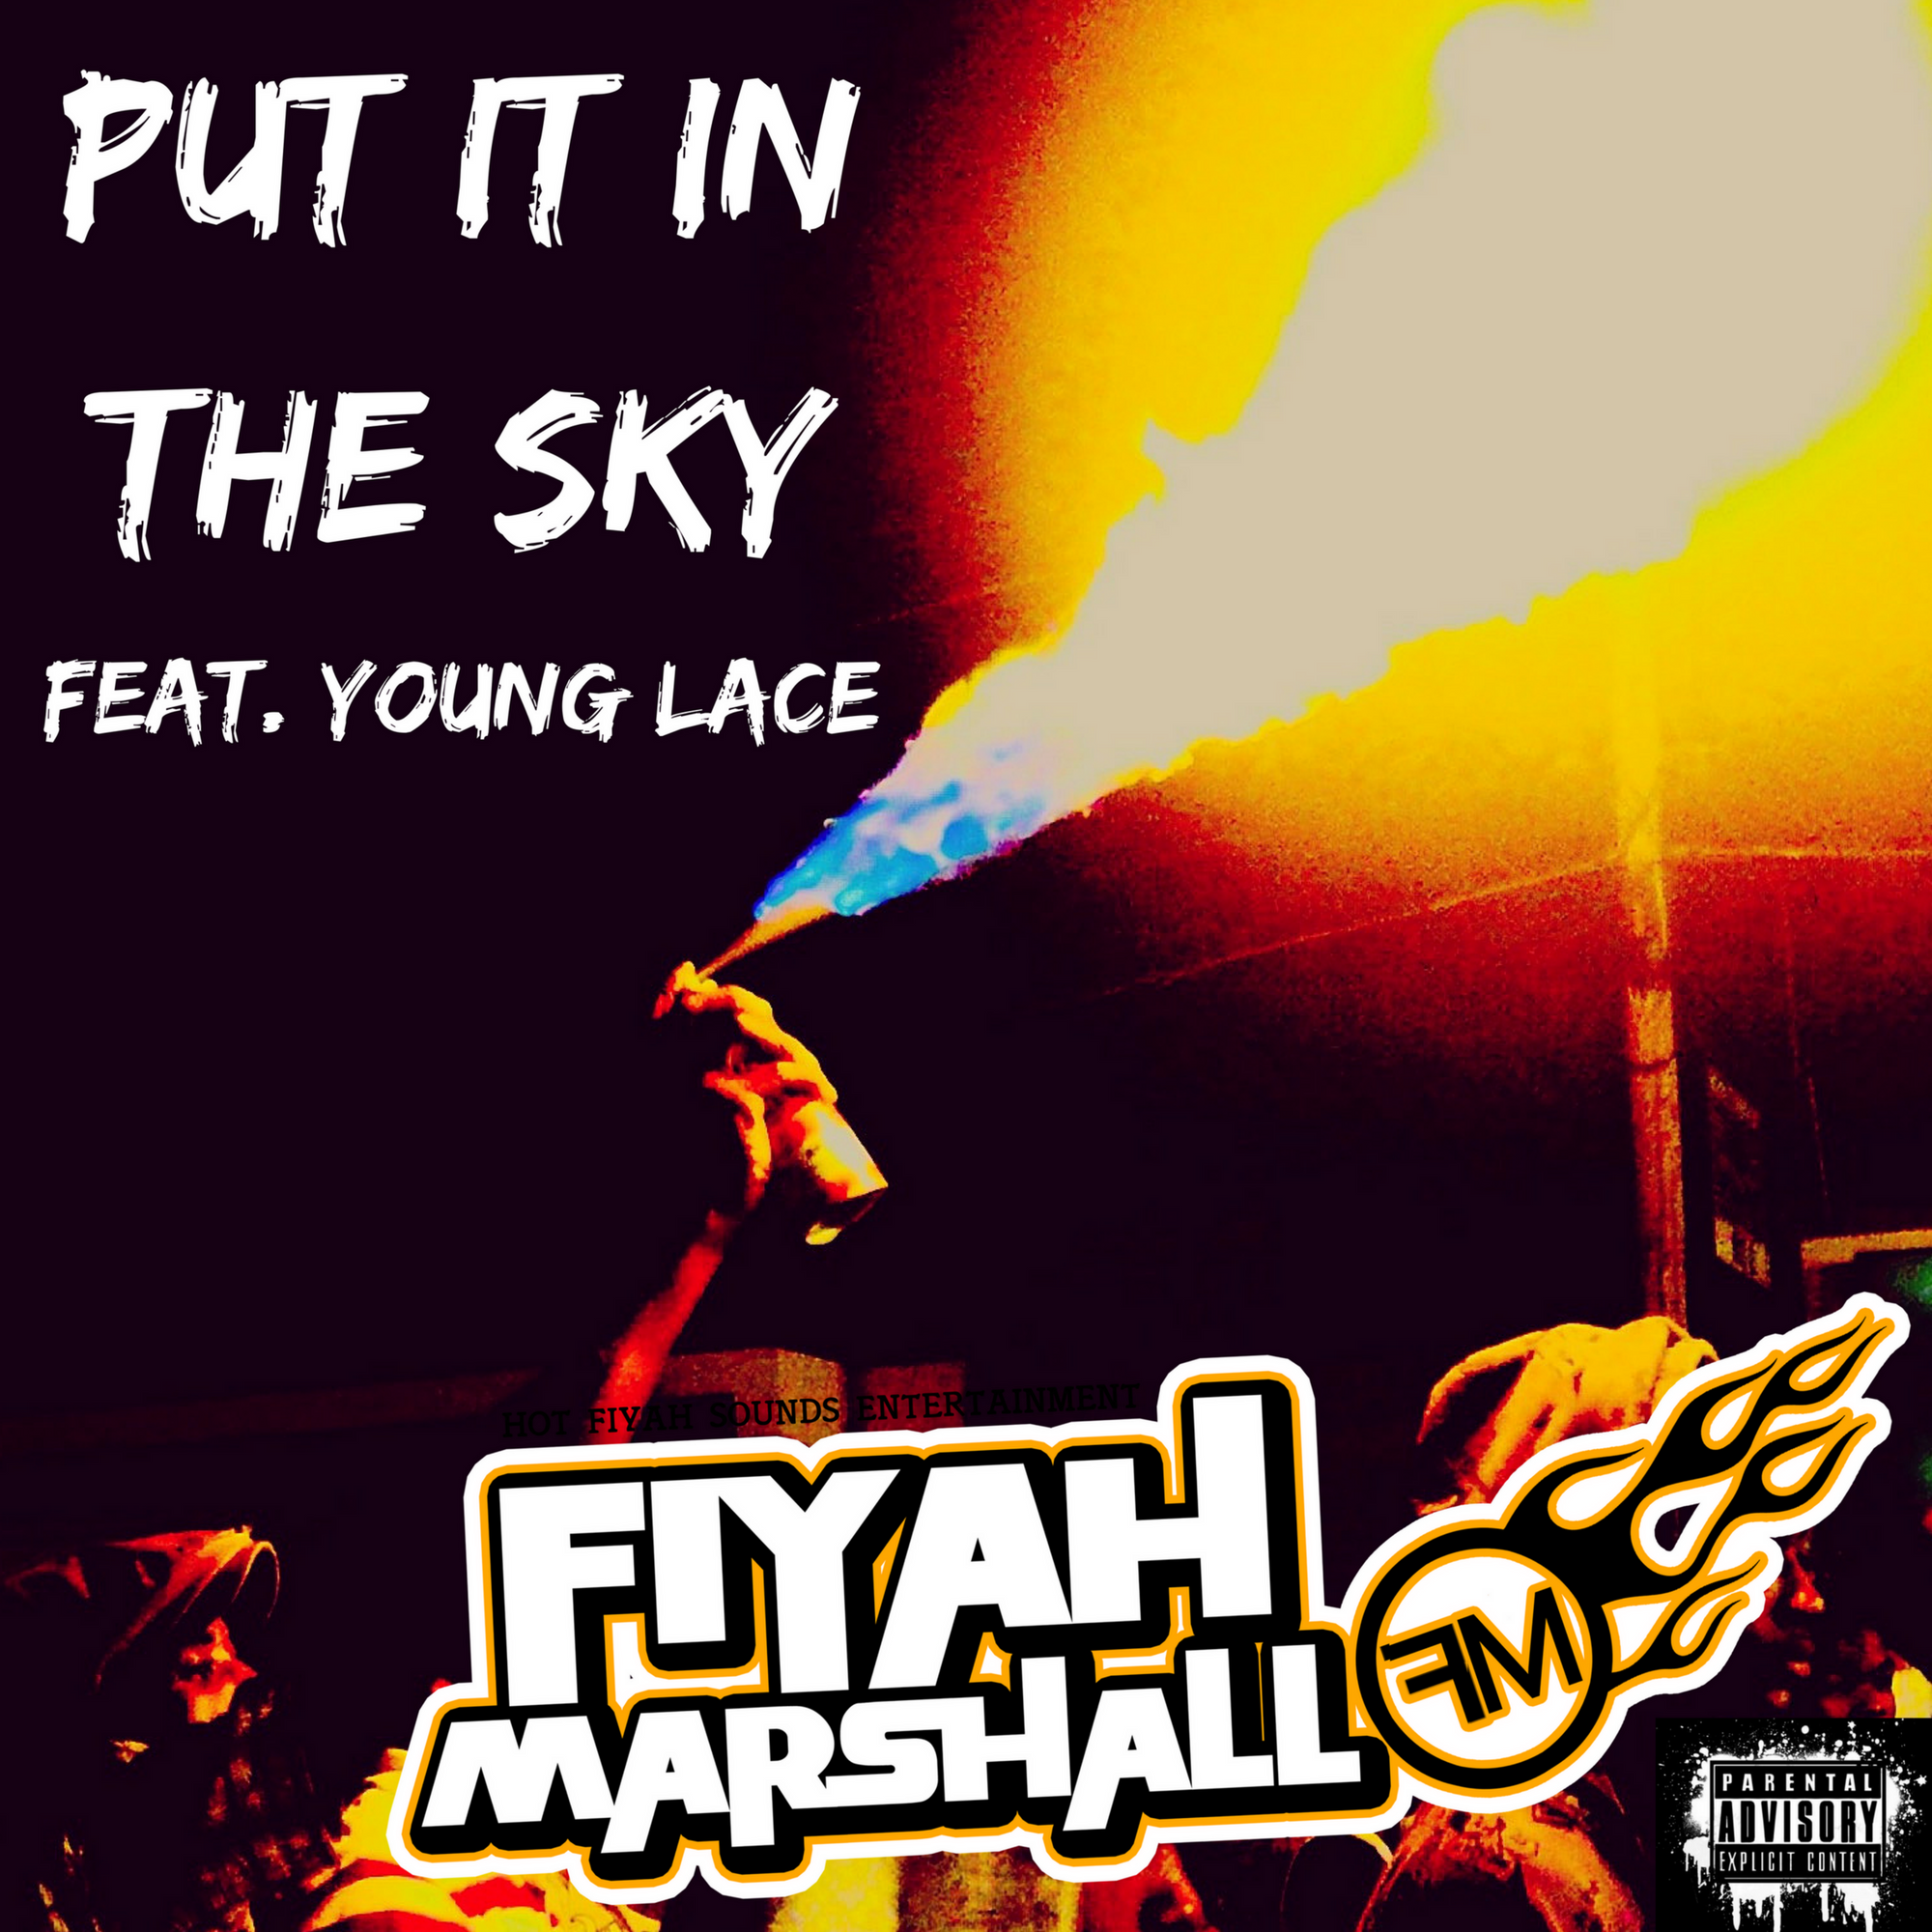 New Music Download: Fiyah Marshall – Put It In The Sky Featuring Young Lace | @fiyah_marshall @itslaceofficial